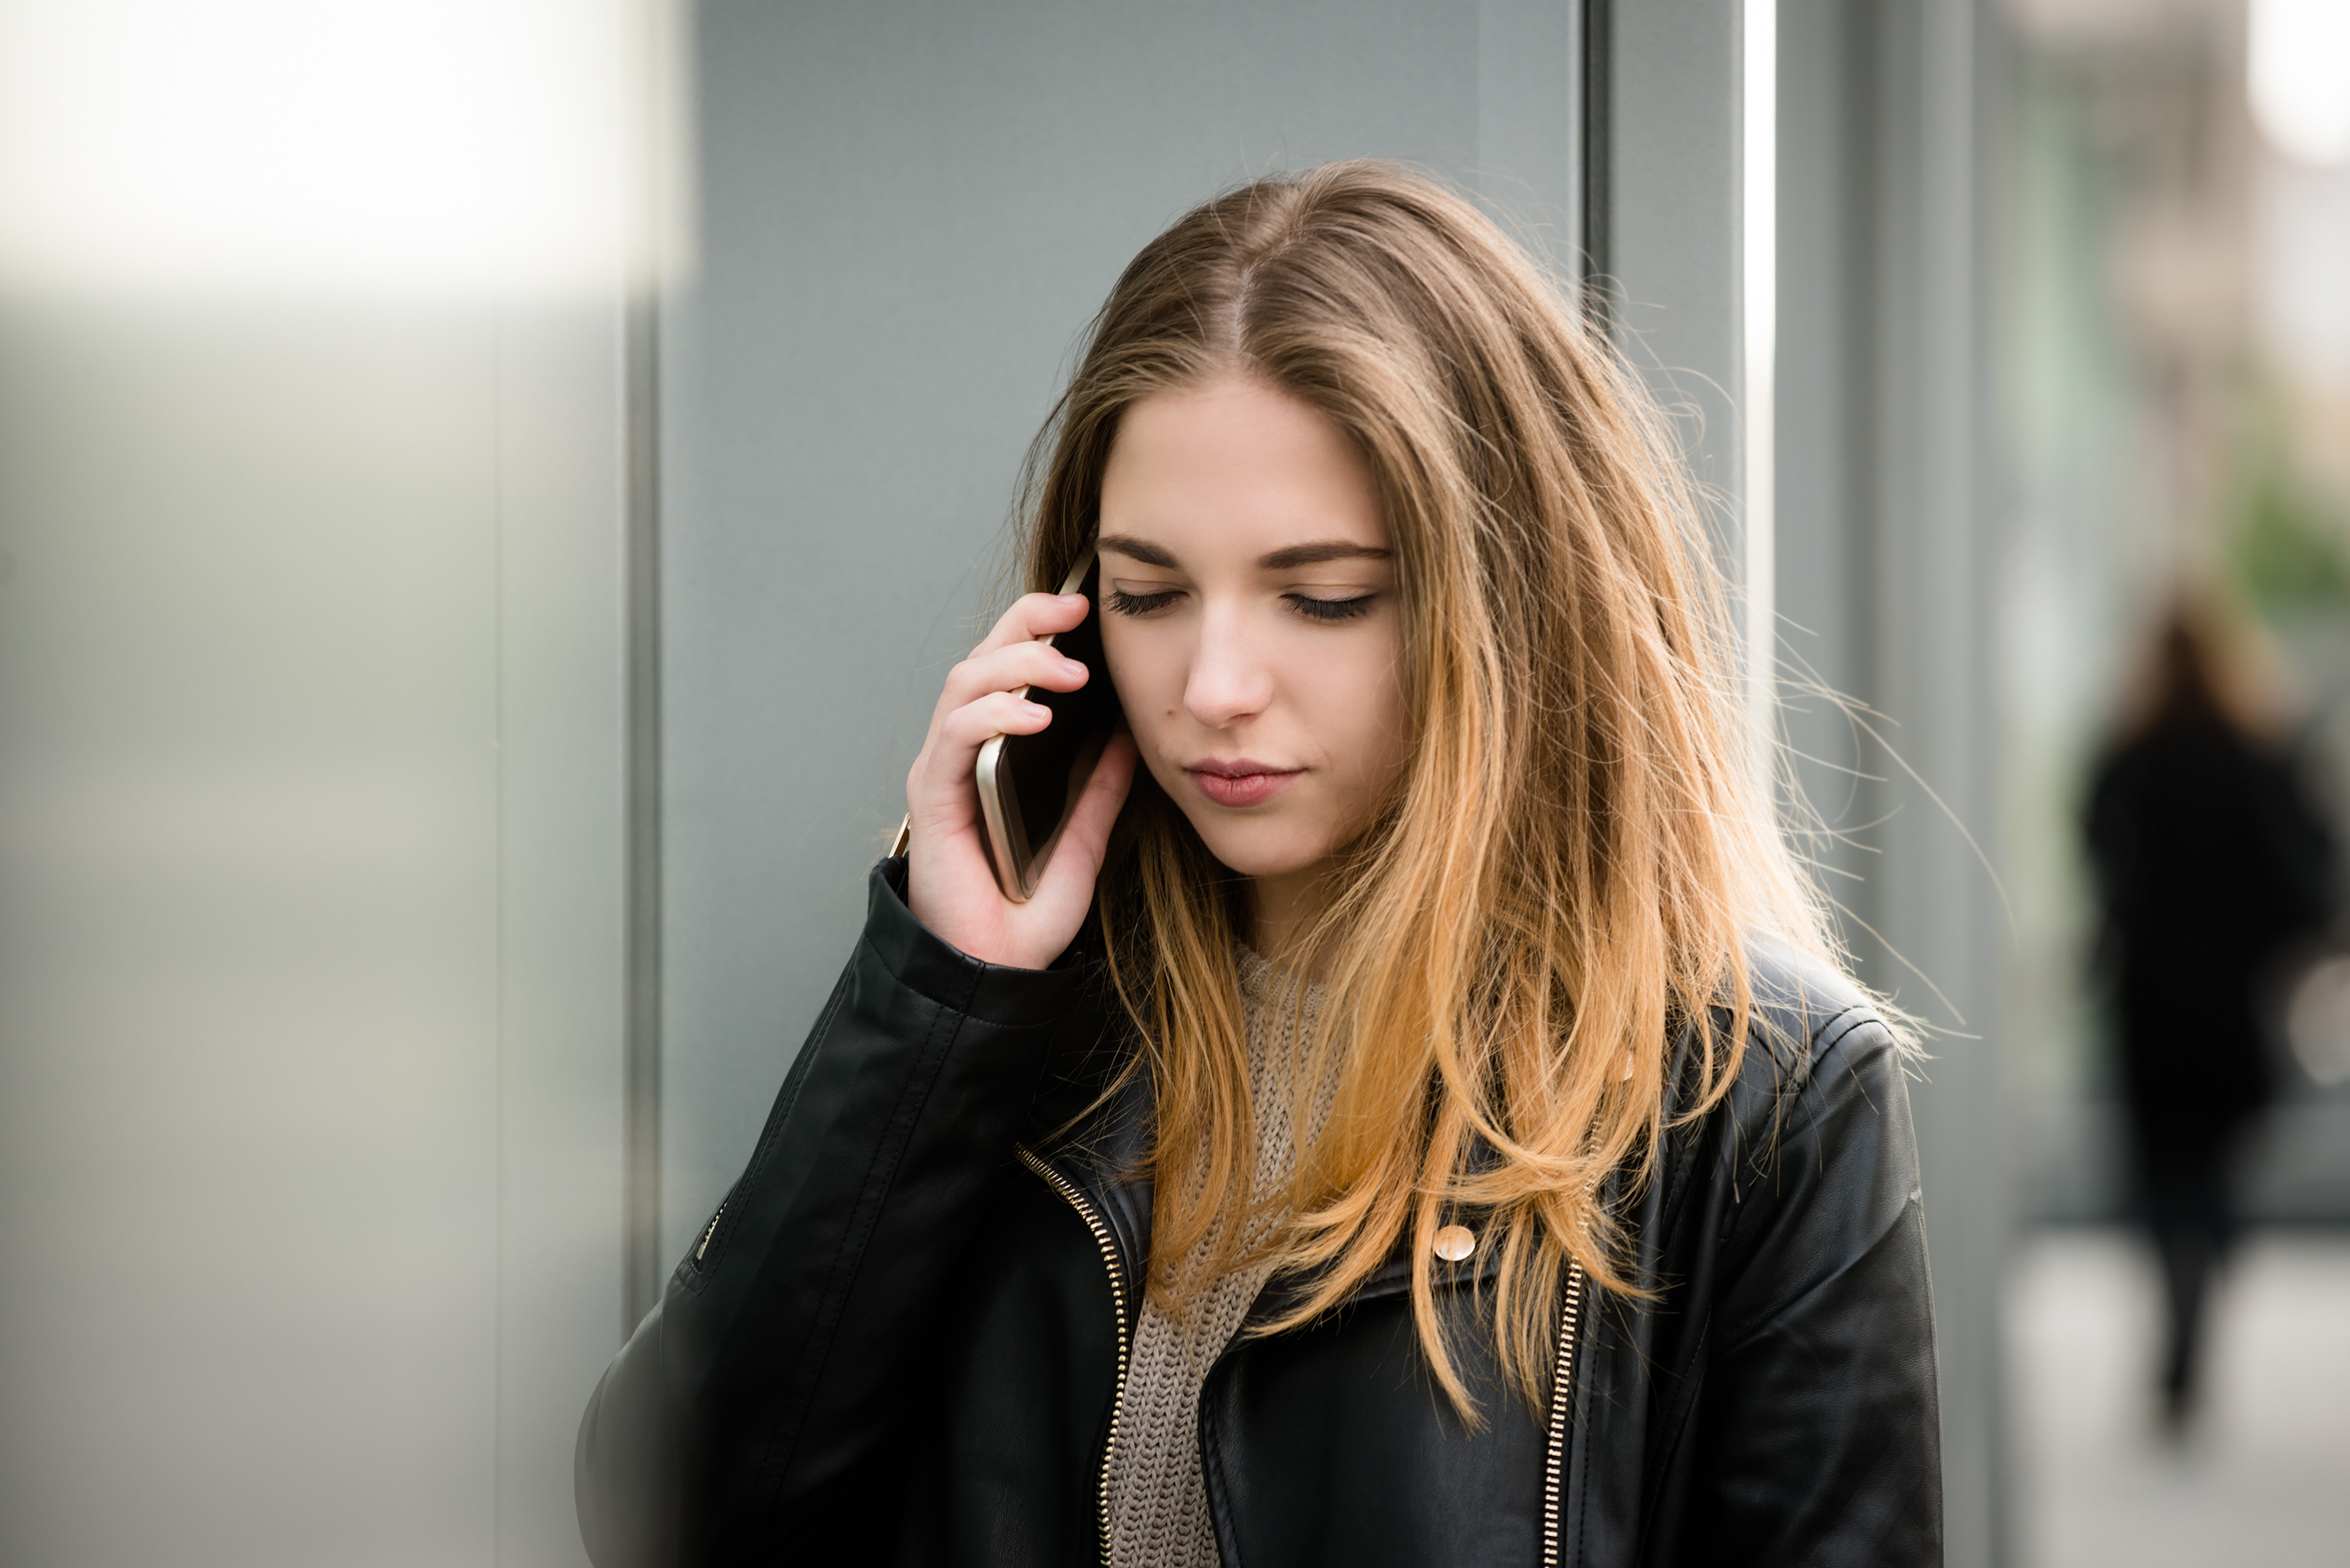 Young woman on phone. | Source: Shutterstock